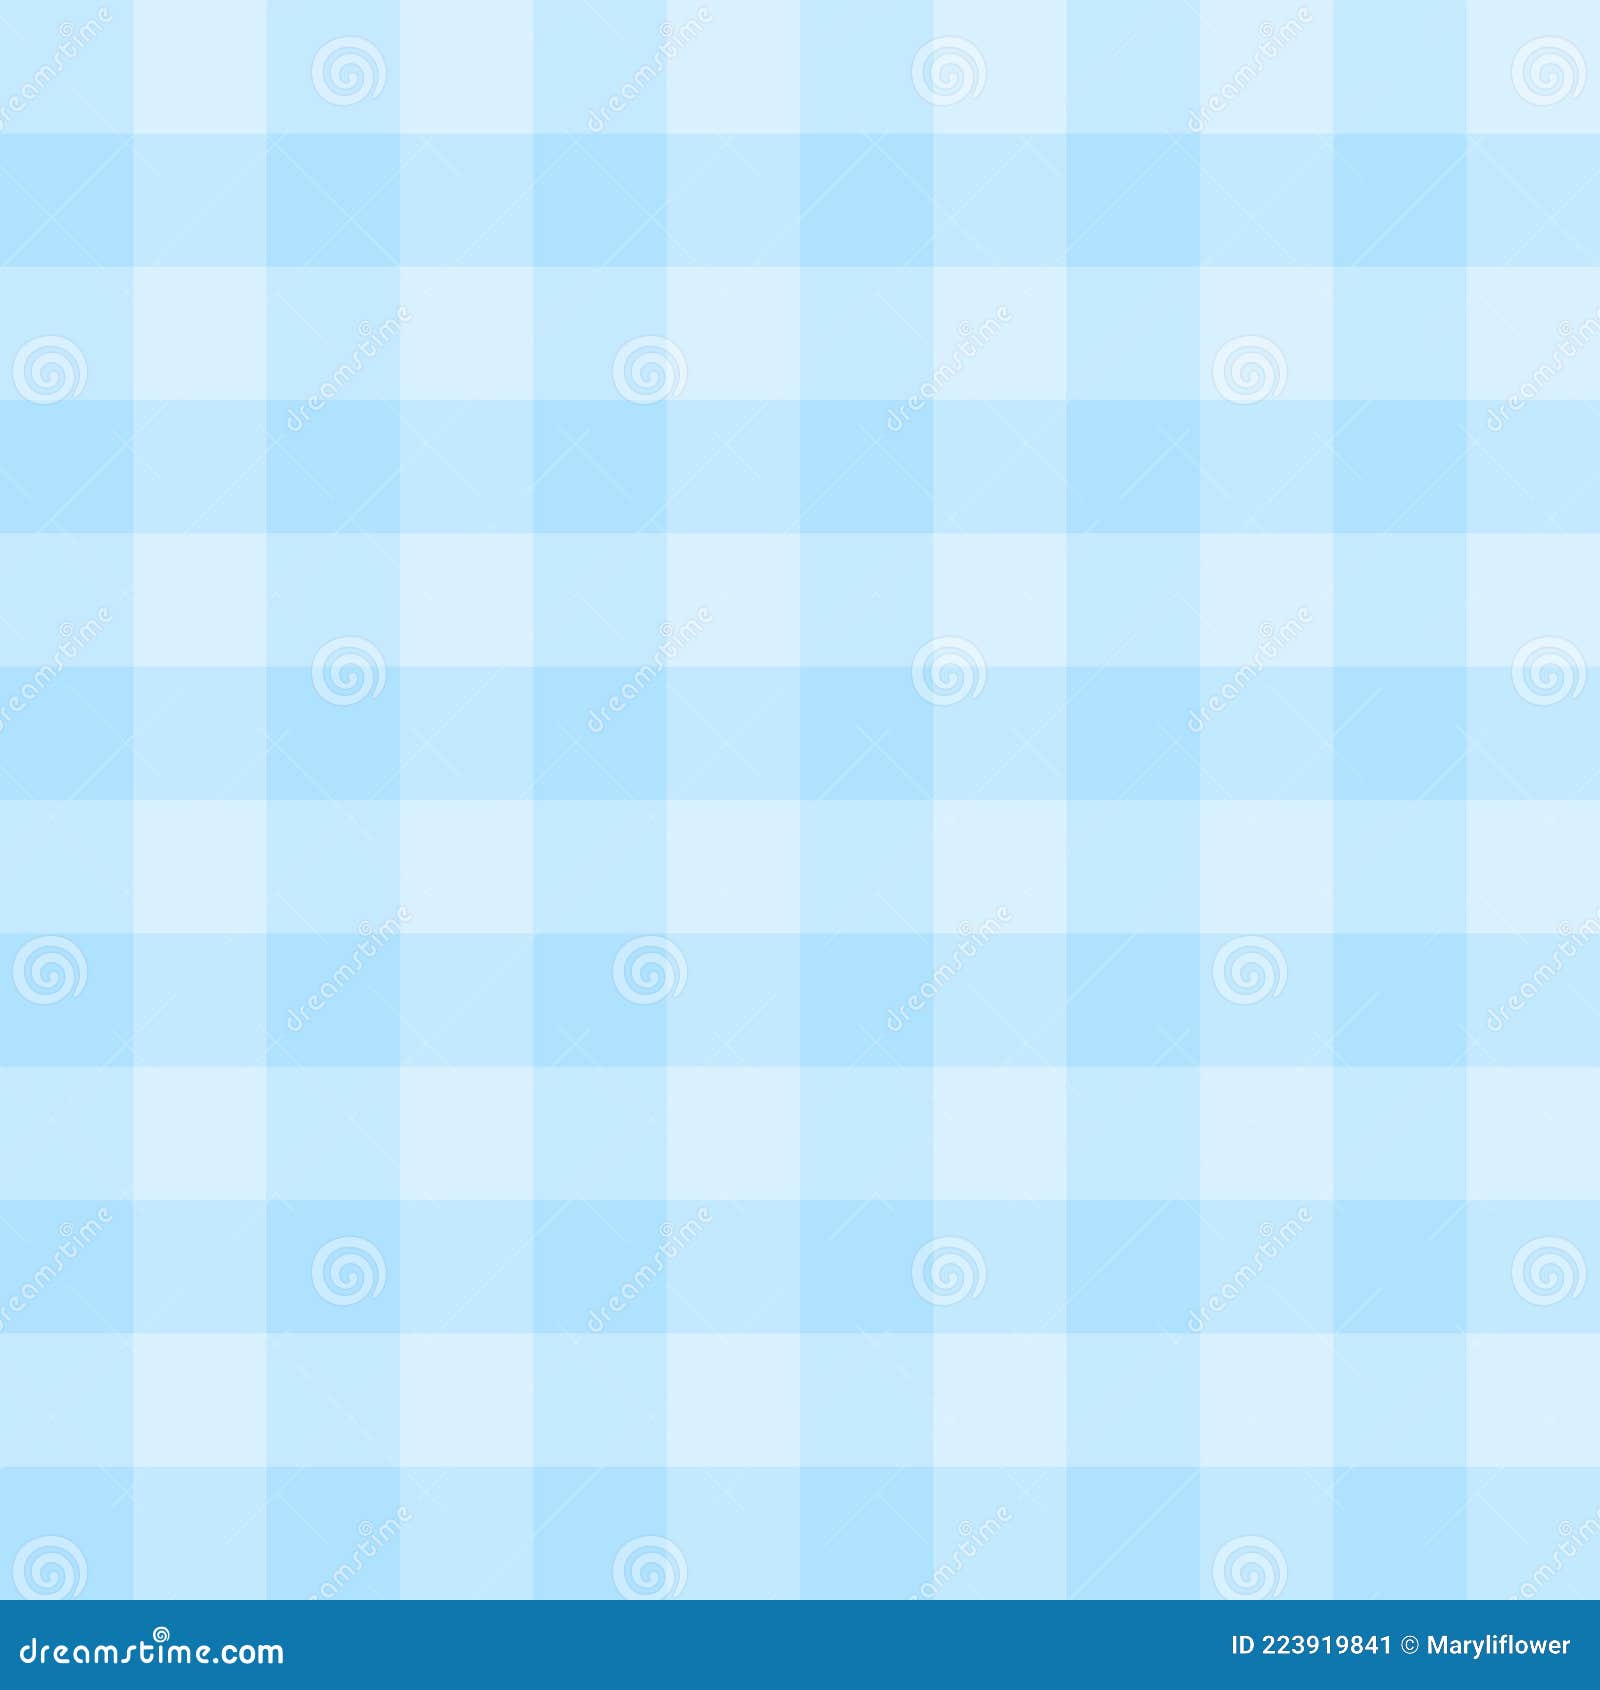 Seamless Light Blue Checked Background with Squares. Gingham Pattern for  Tablecloths, Plaid, Clothes, Wrapping, Bedding Stock Vector - Illustration  of cook, light: 223919841